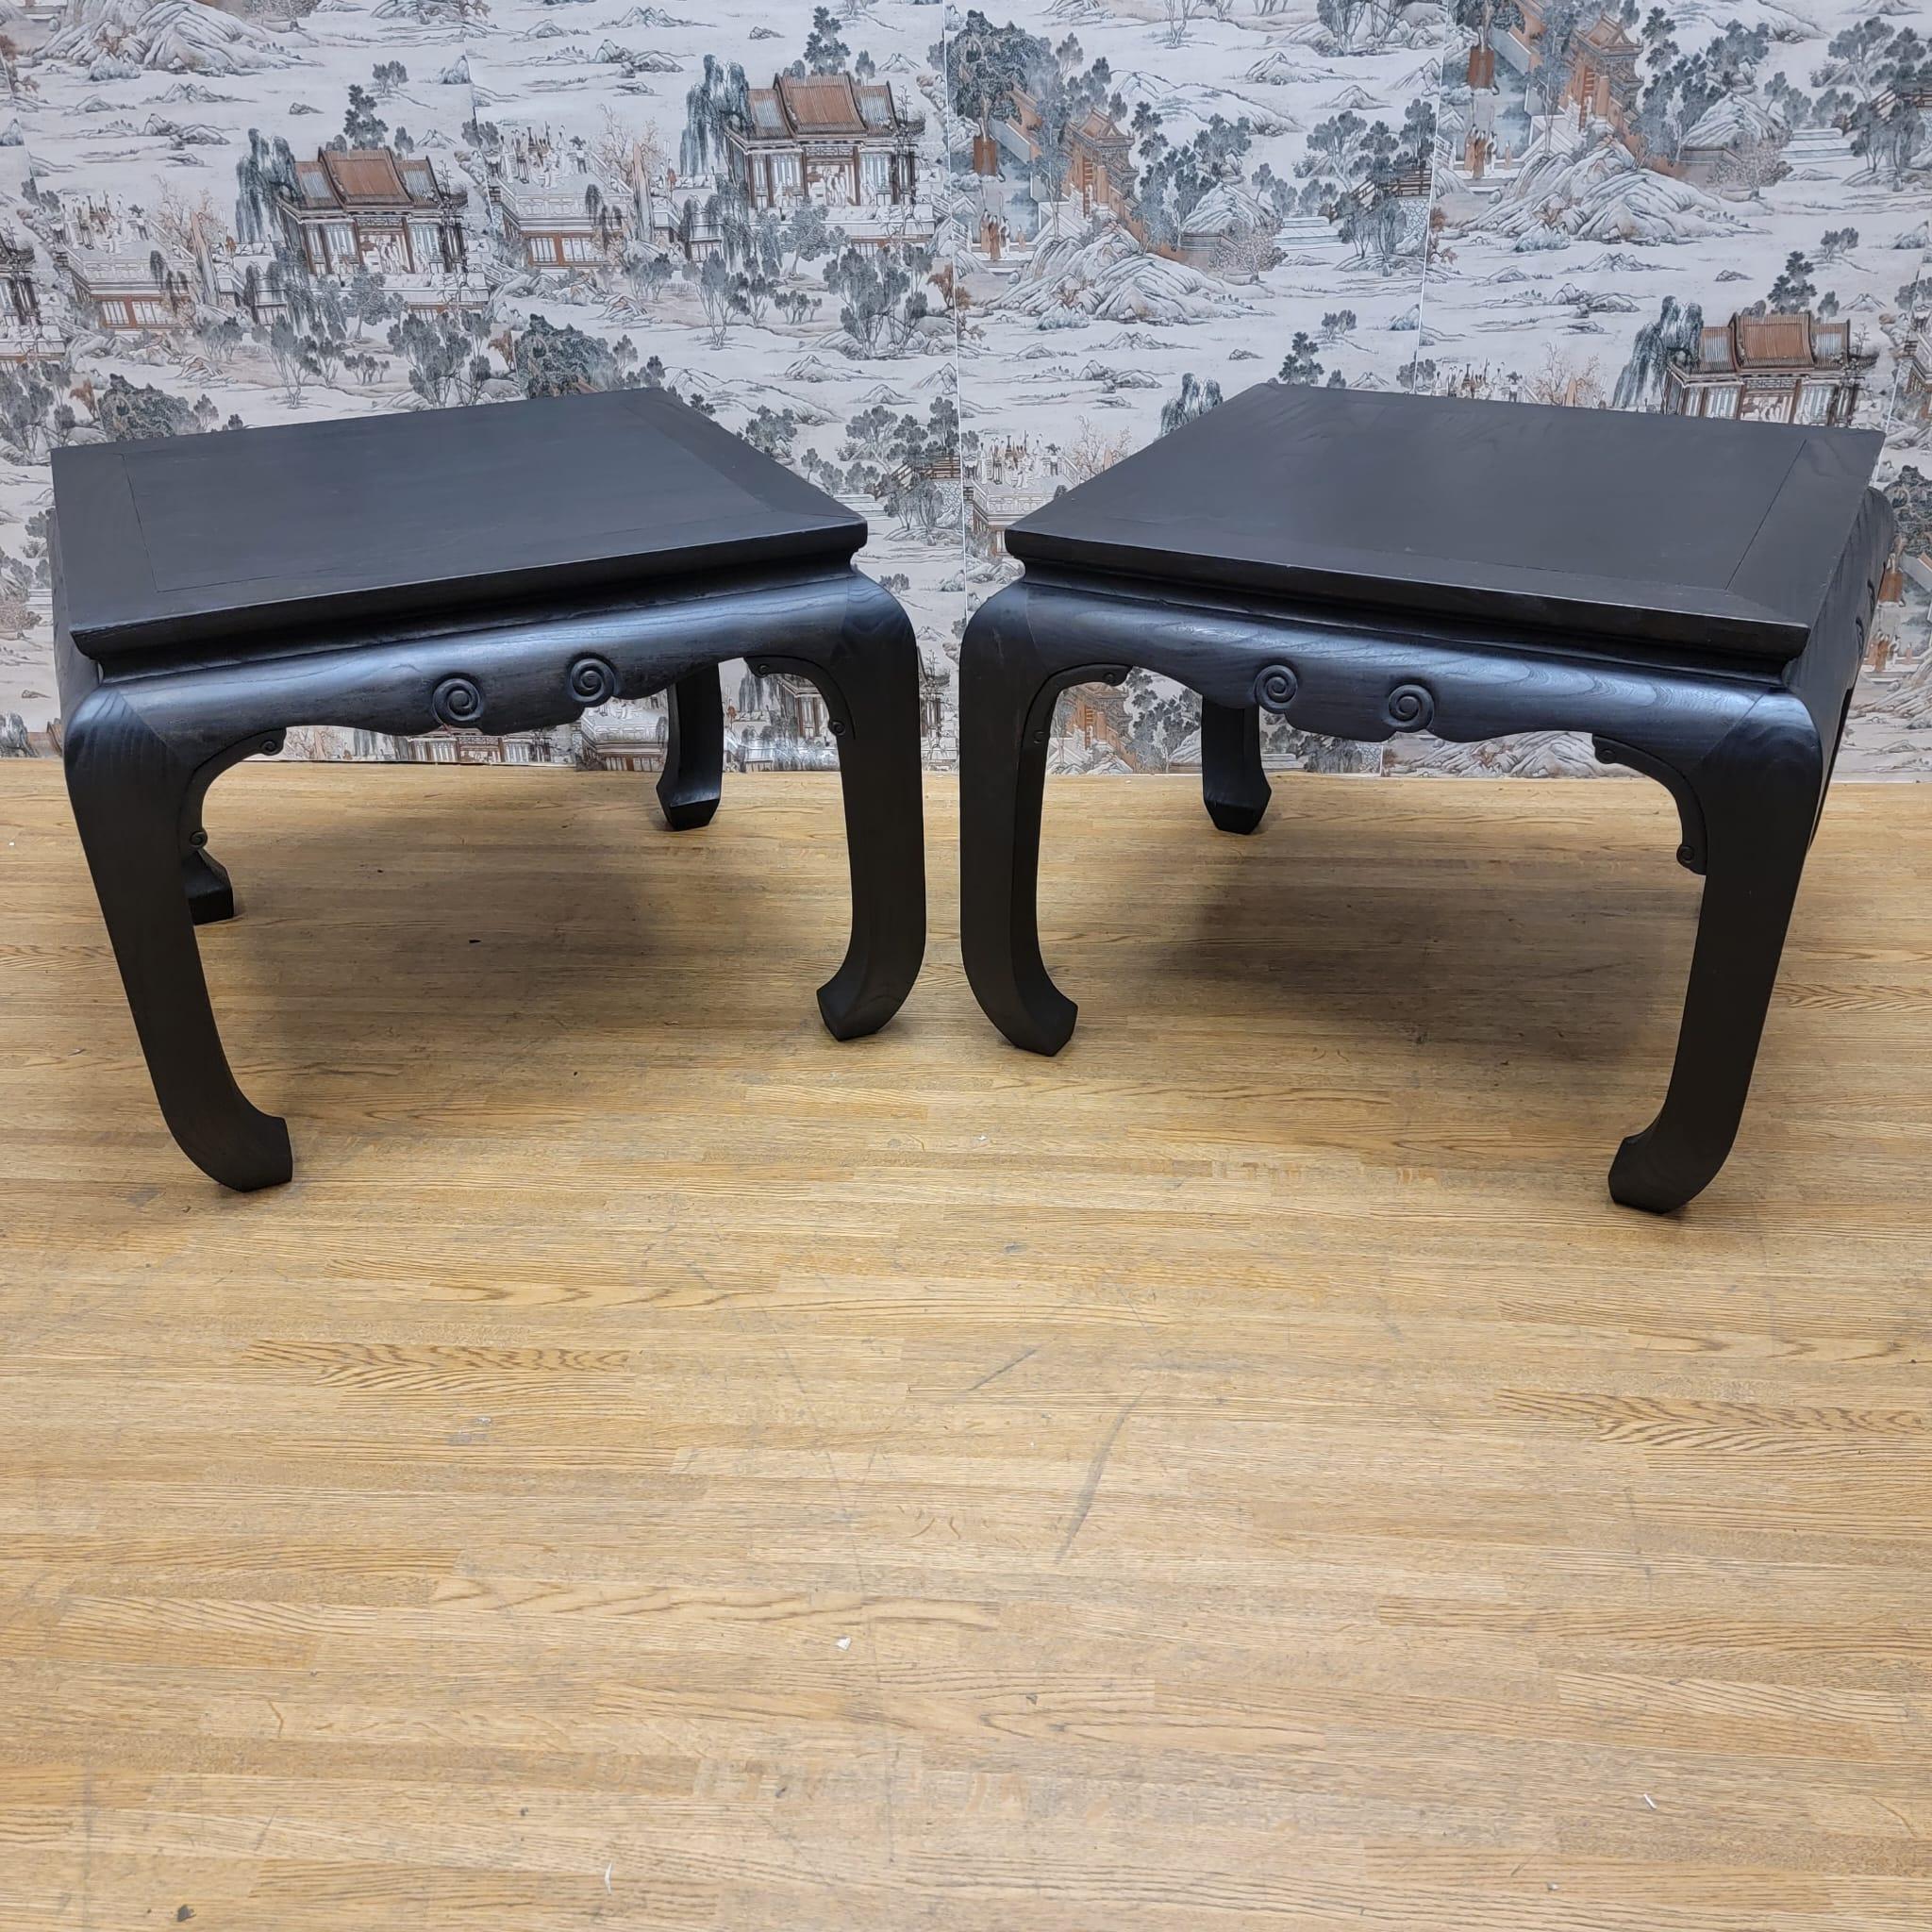 Antique Shanxi province black lacquer elm side table - pair.

These beautiful black lacquered elm side tables have all its original color and patina. 

Circa: 1900

Dimensions:

H 22